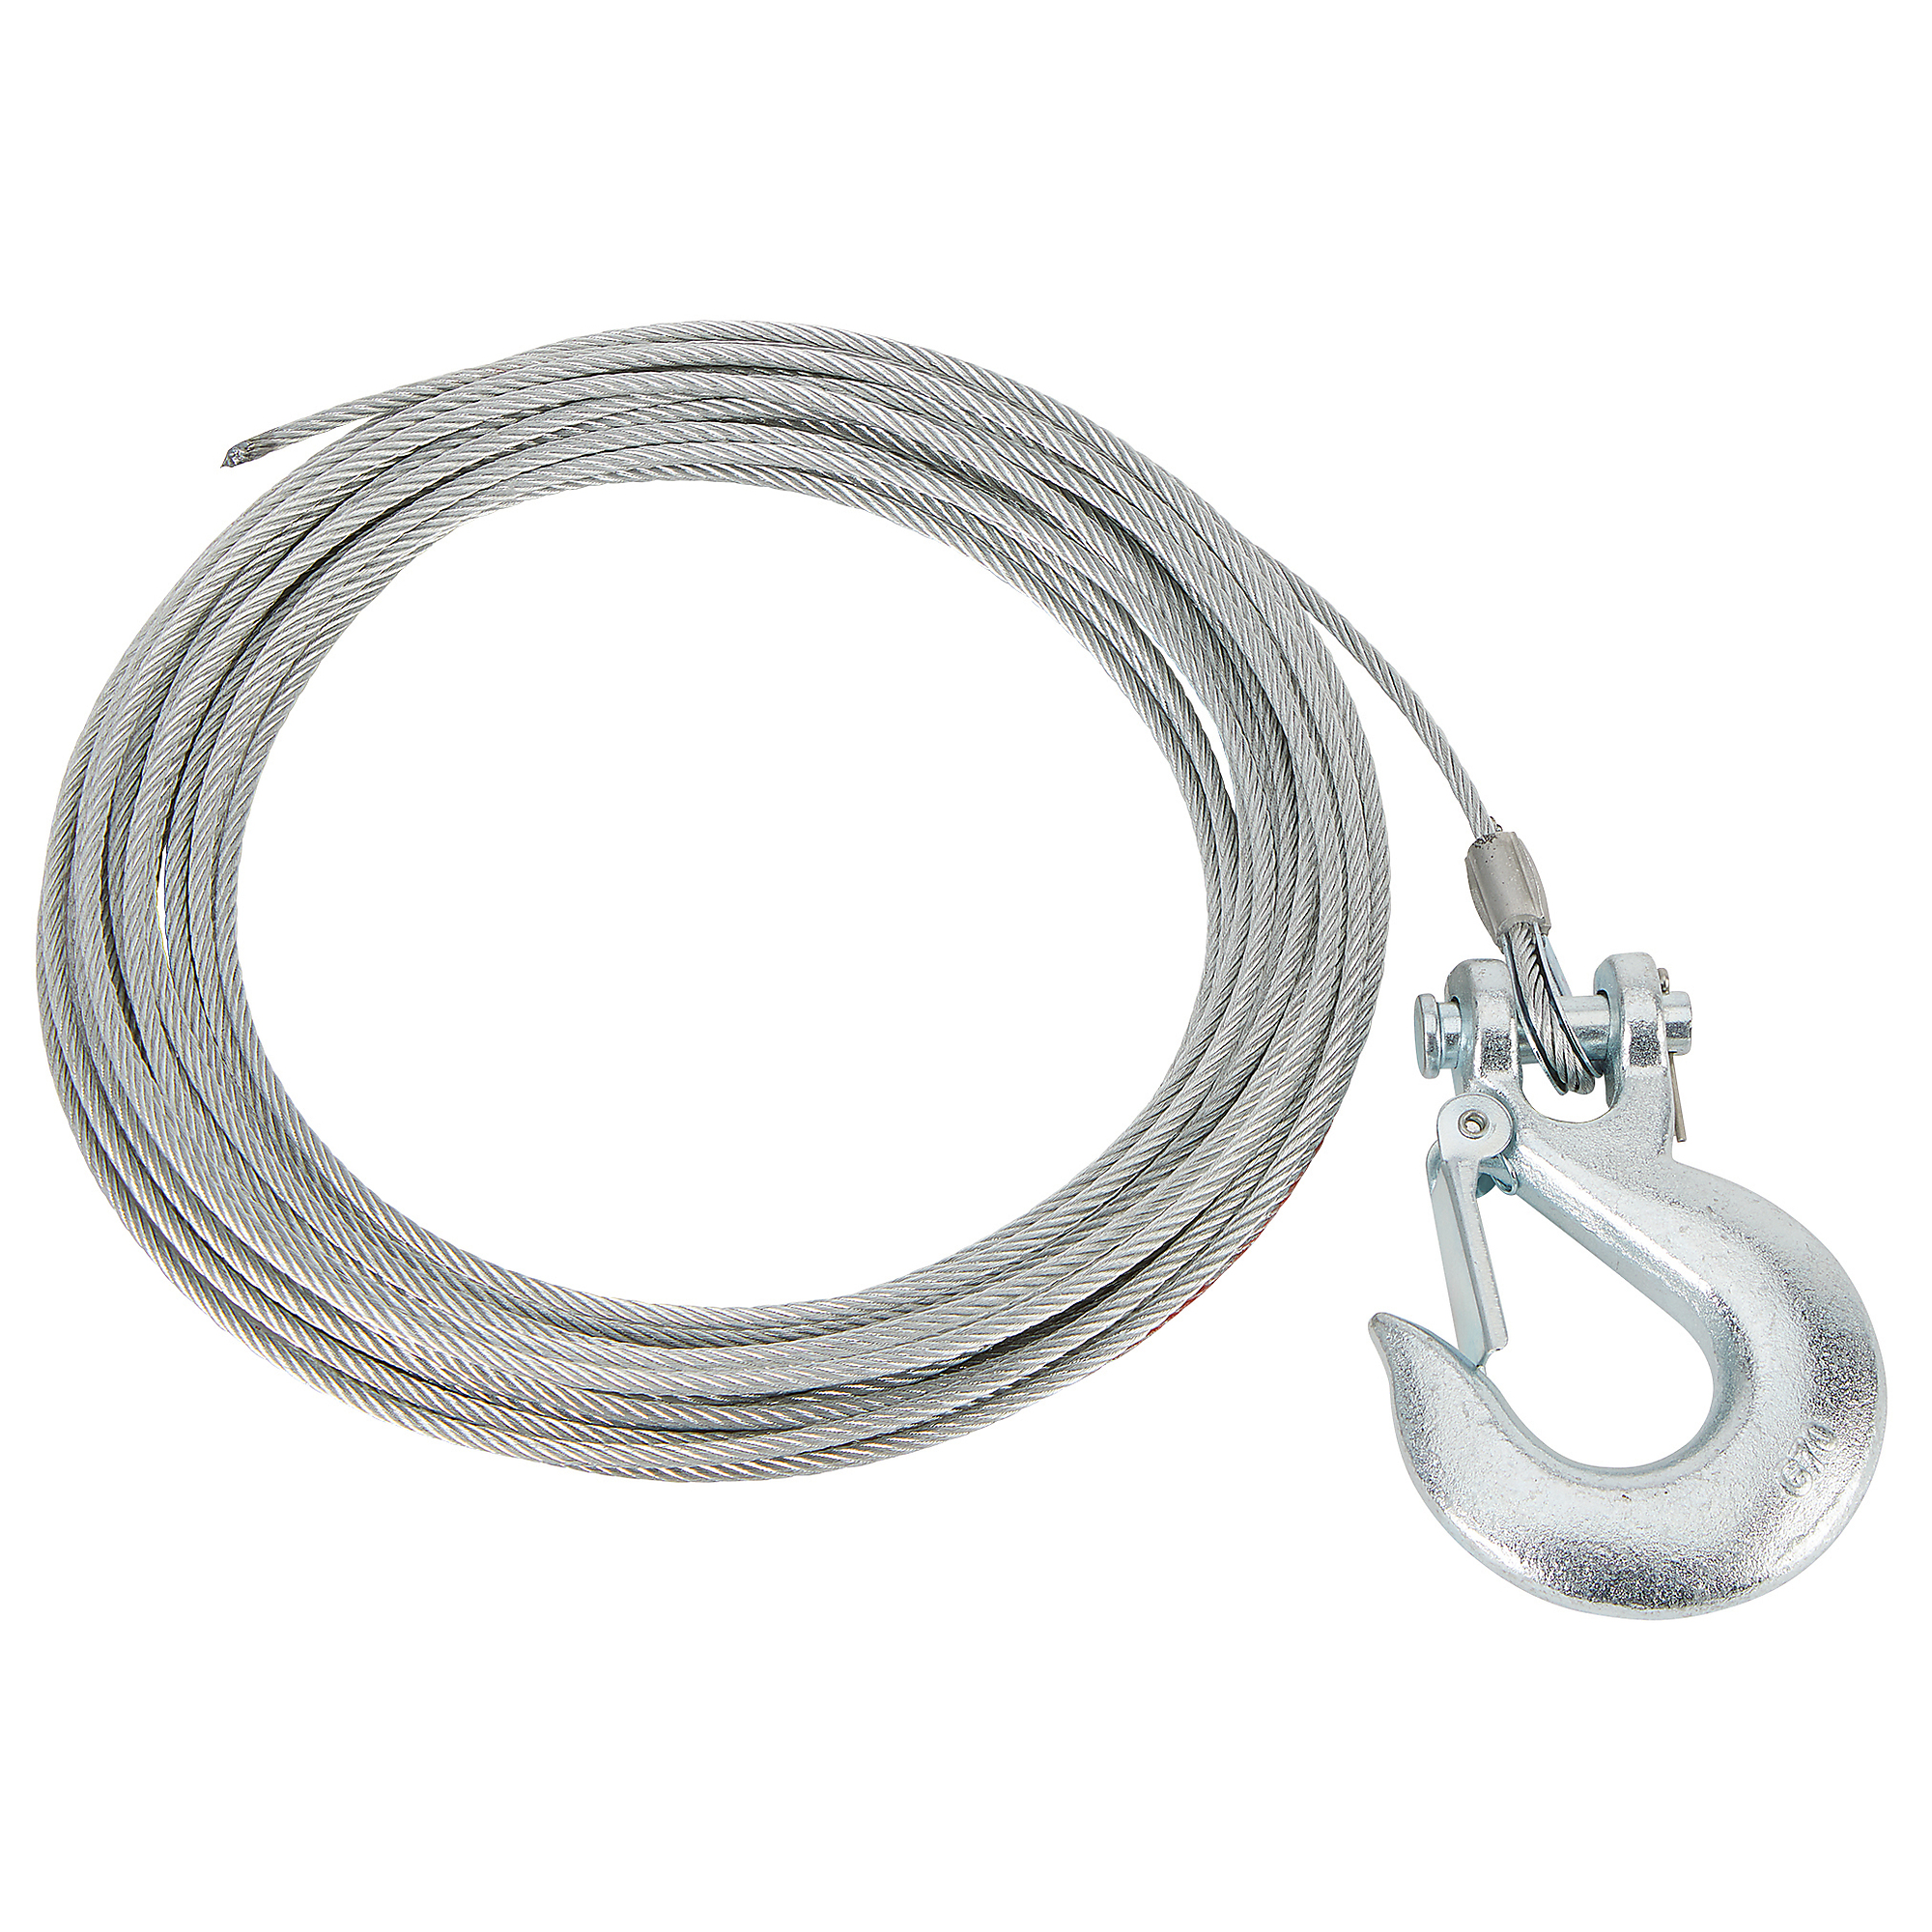 Ultra-Tow Wire ATV Winch Rope with Hook, 5/32in. dia. x 50ft.L, for Use  with 2500-Lb. to 3500-Lb. Winches